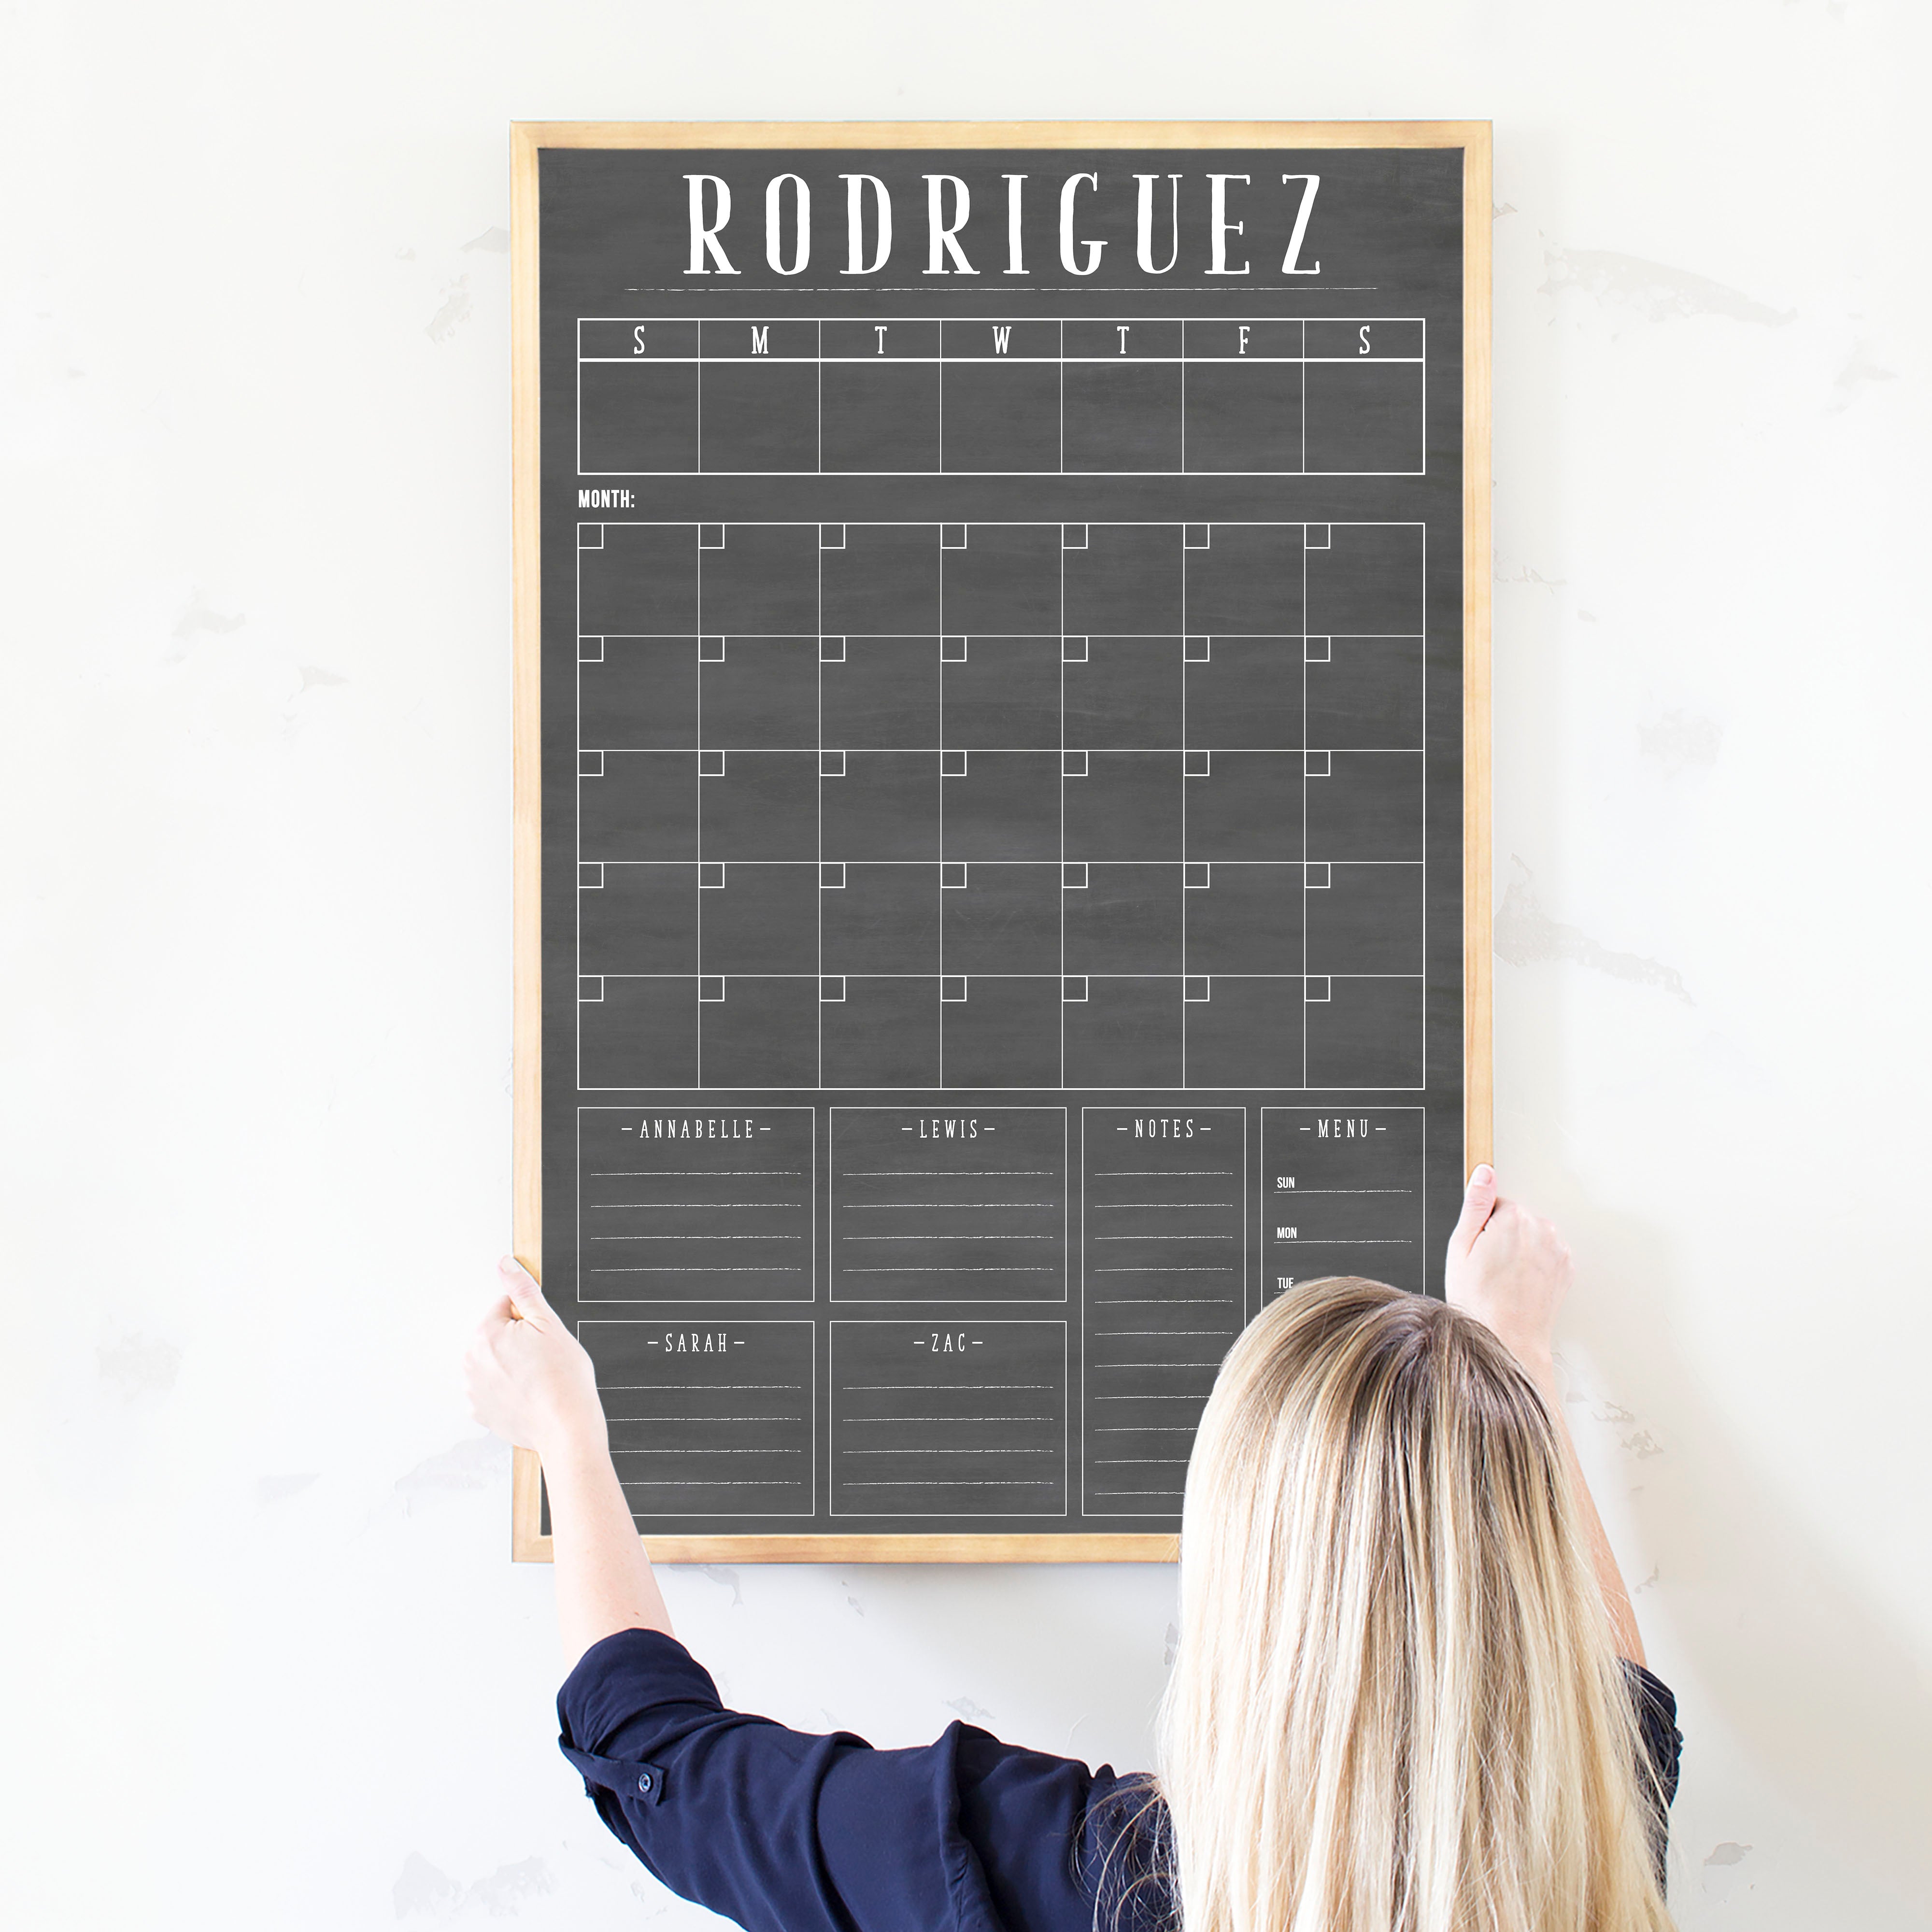 A framed dry-erase chalkboard calendar with a monthly and weekly format hanging on the wall